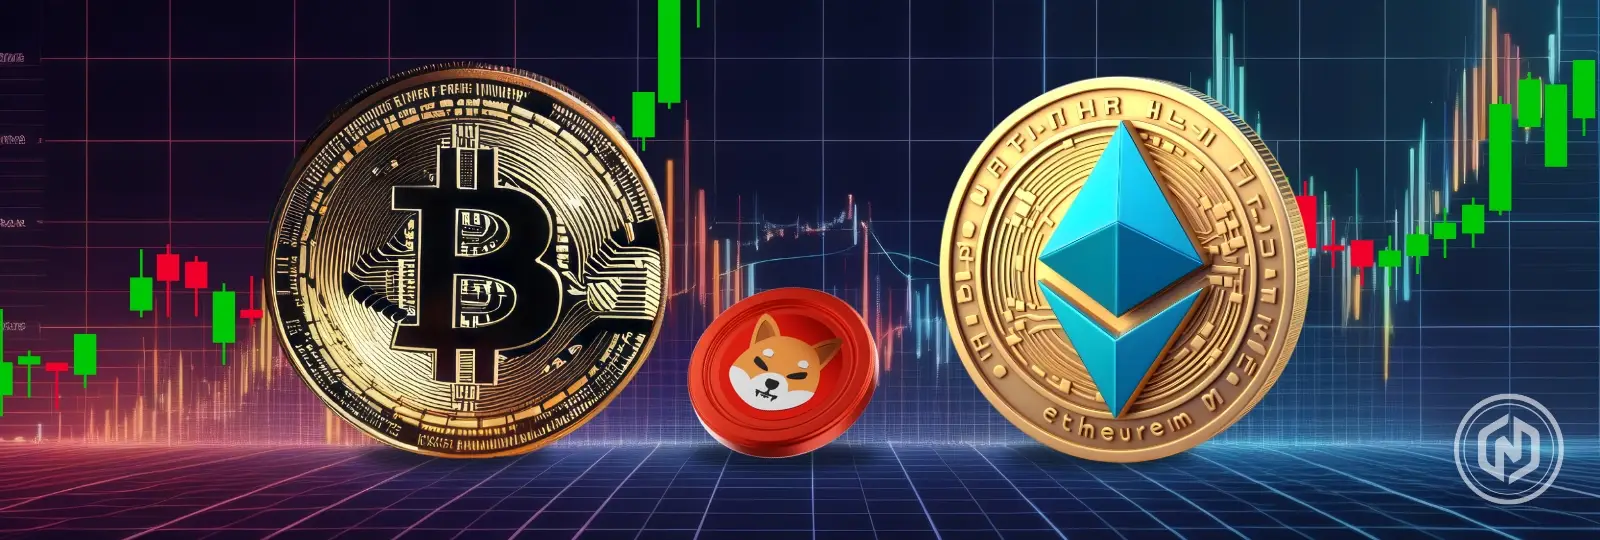 Crypto updates: Bitcoin, Ethereum See gains, memecoins rise but SHIB slips